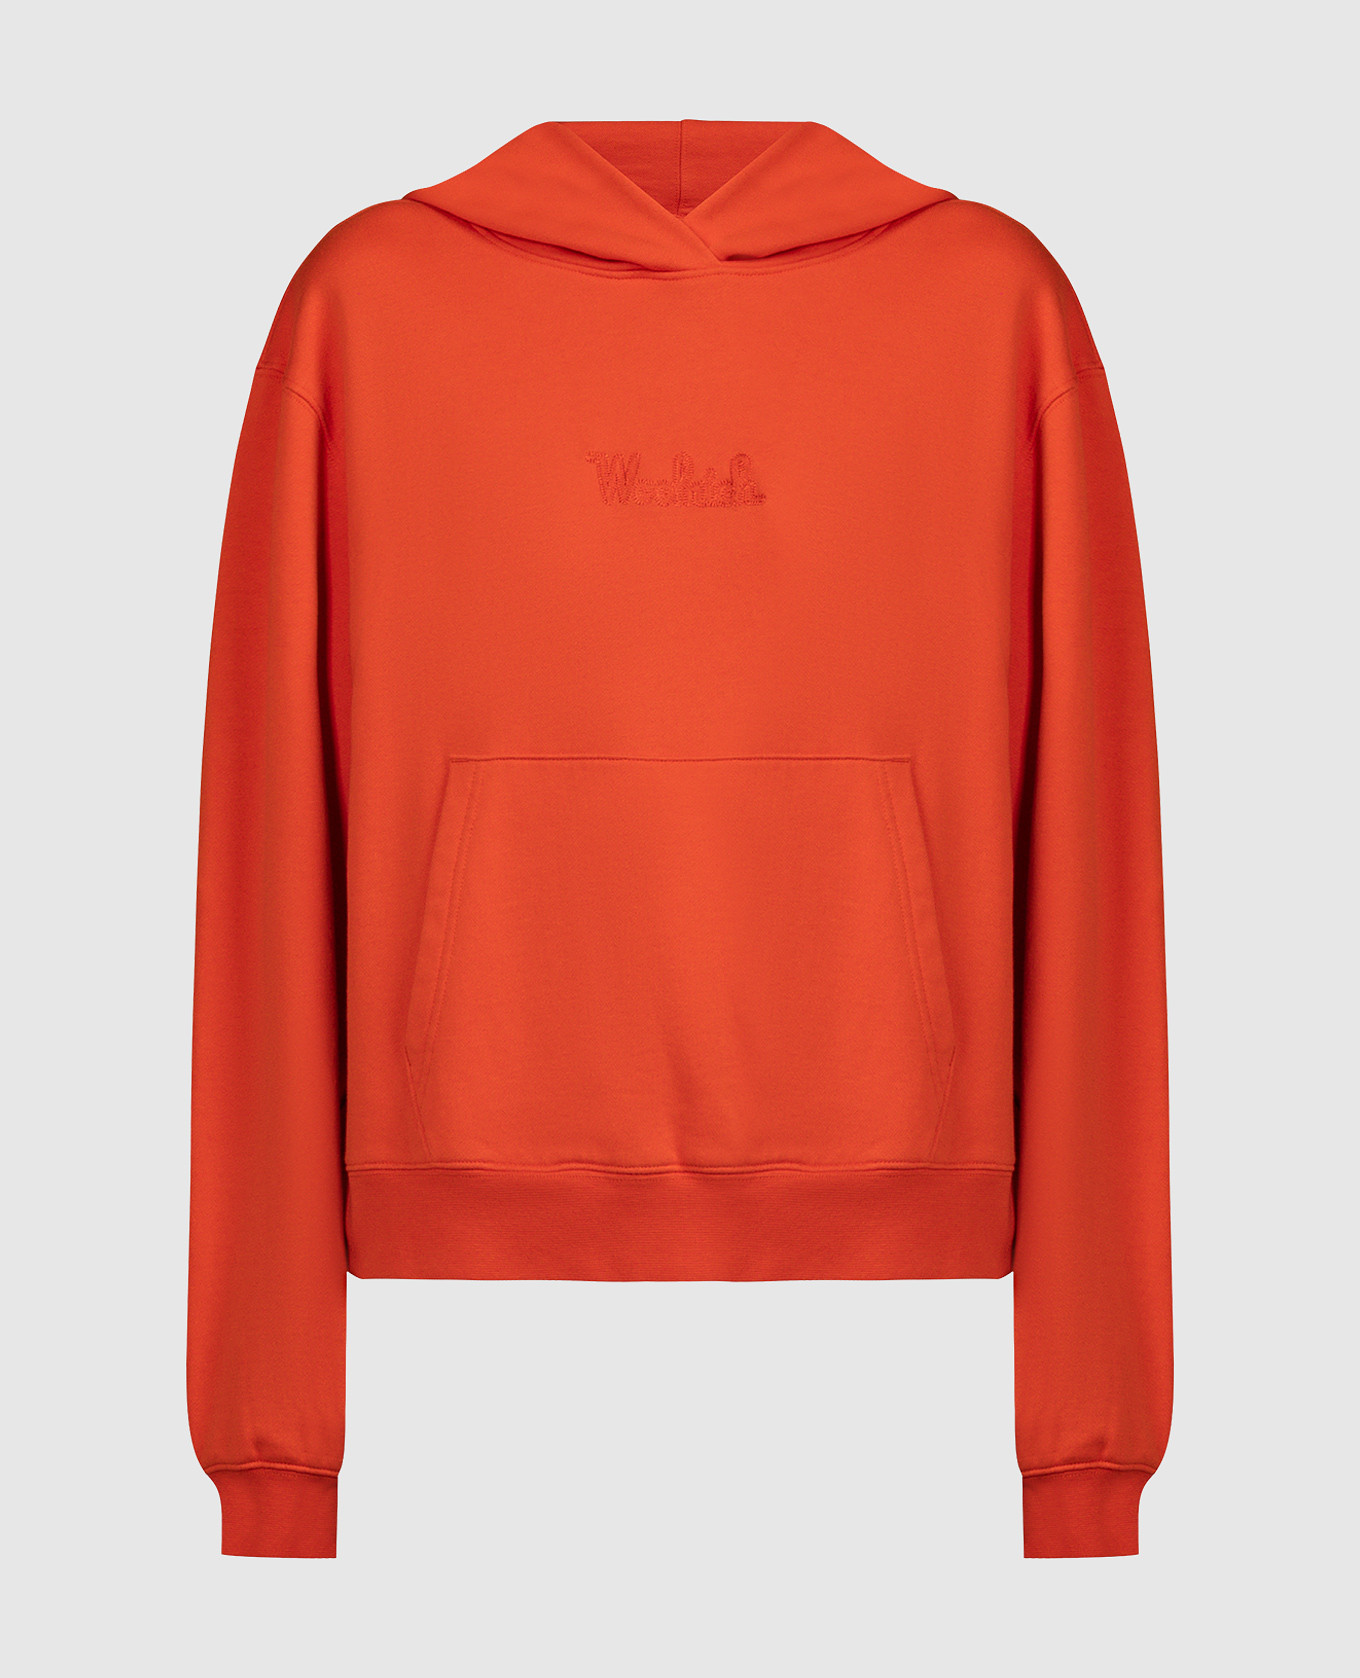 Orange hoodie with logo embroidery